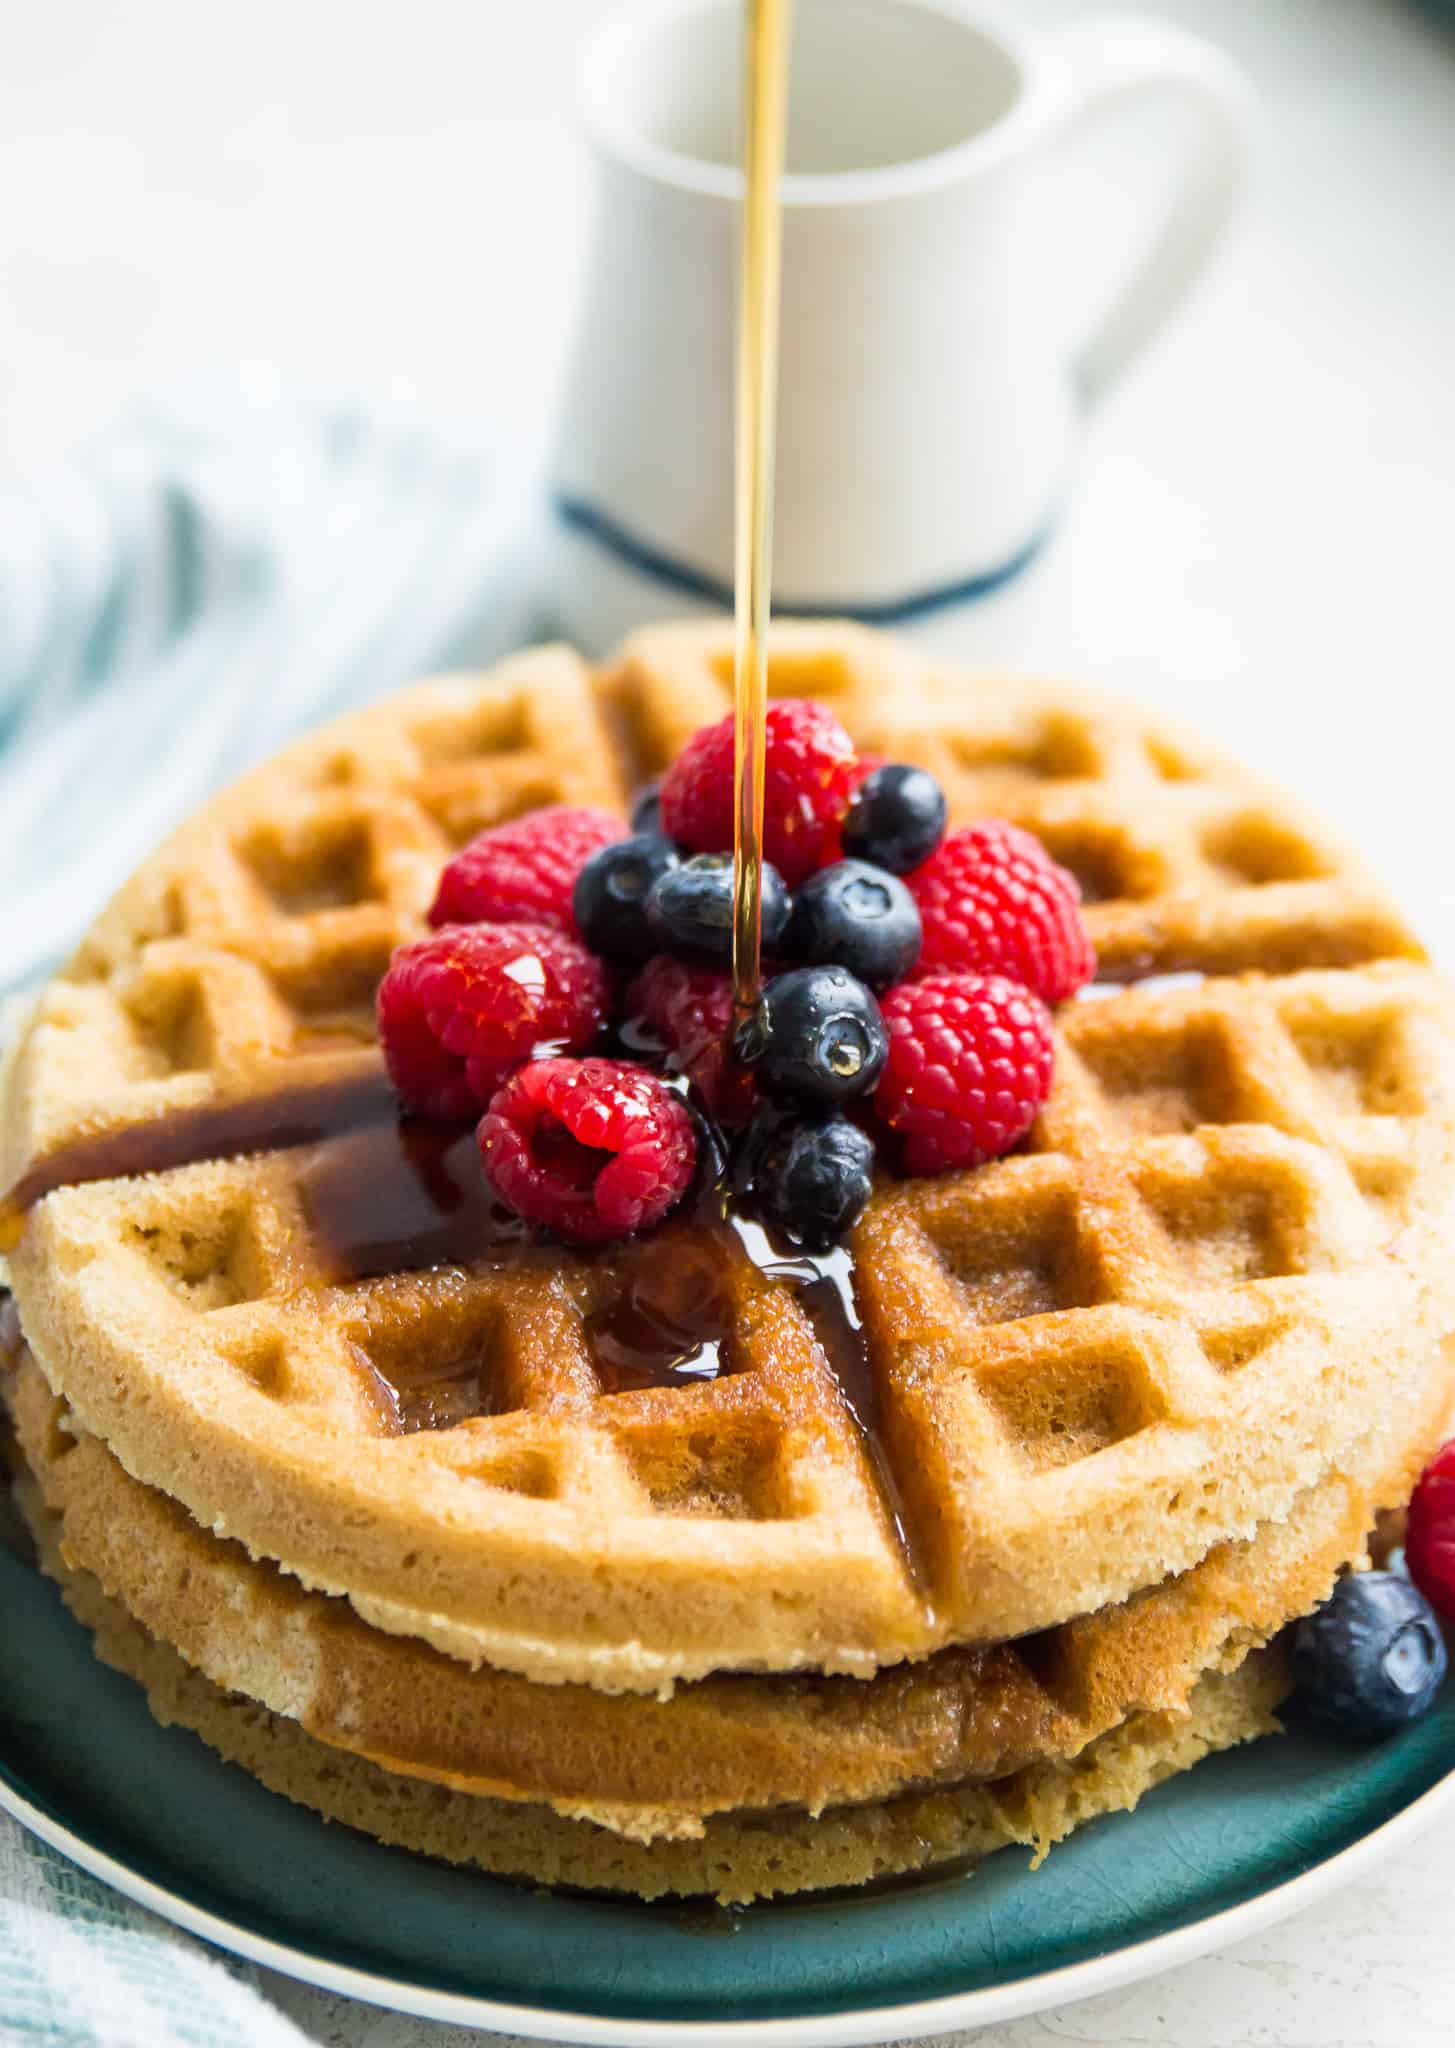 Paleo waffles topped with blueberries and raspberries with maple syrup being poured on them.